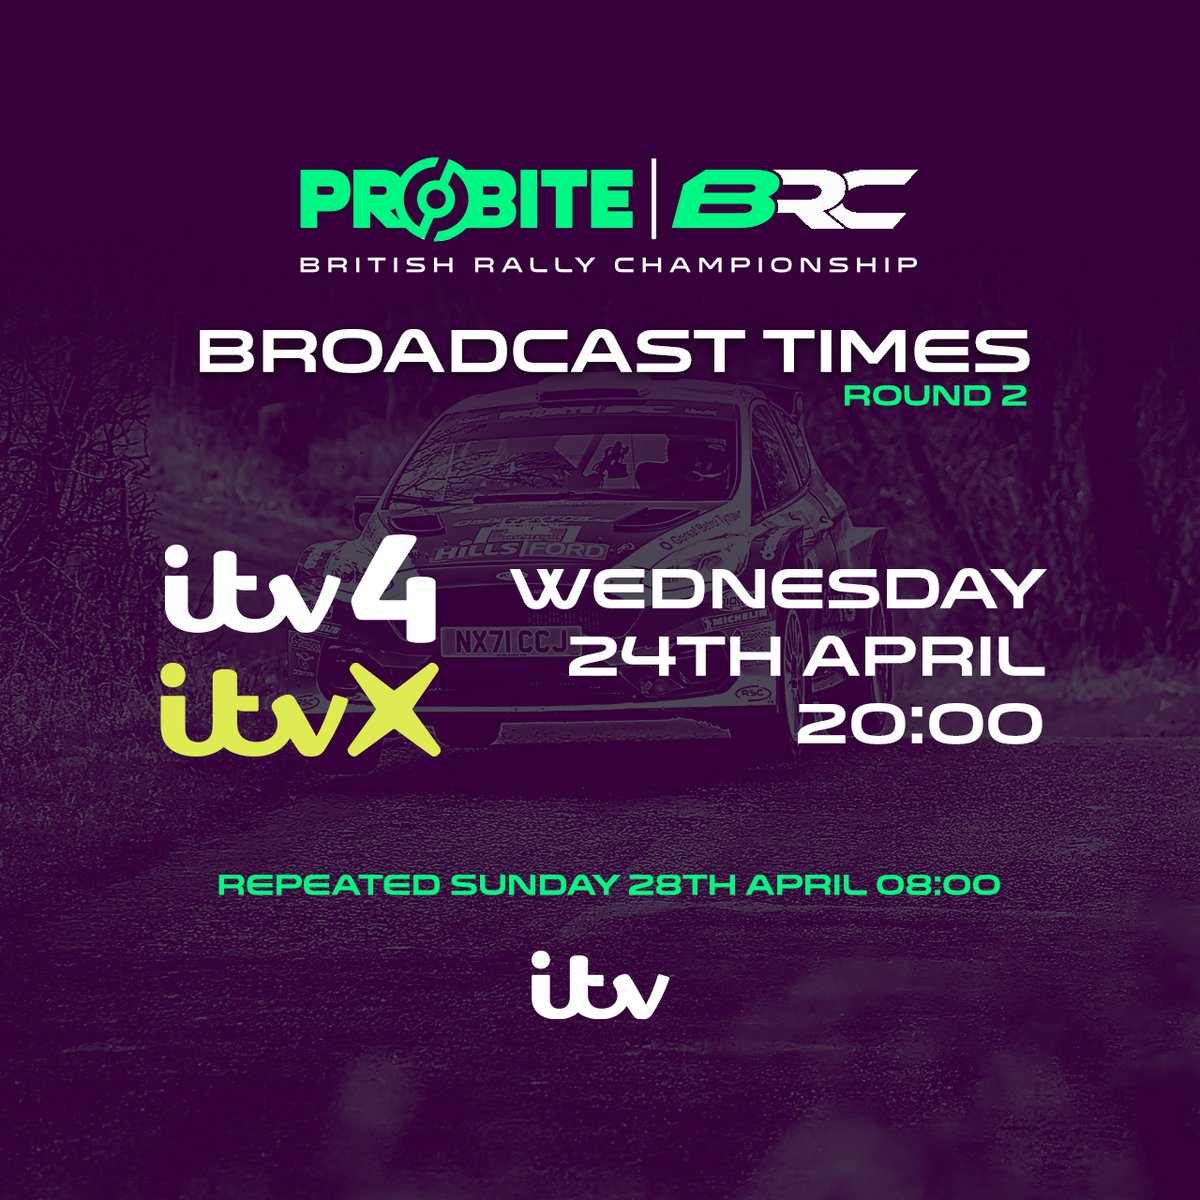 📺 @ProbiteBrakes #BRC - Round 2 -@RallynutsStages TV times 📺 Time to set your reminders again, as the breathtaking Welsh gravel of round 2 hits your TV screens on Wednesday 24th April at 20:00. Catch the action on ITV4 & ITVX, repeated Sunday 28th April at 08:00. #BRCRally